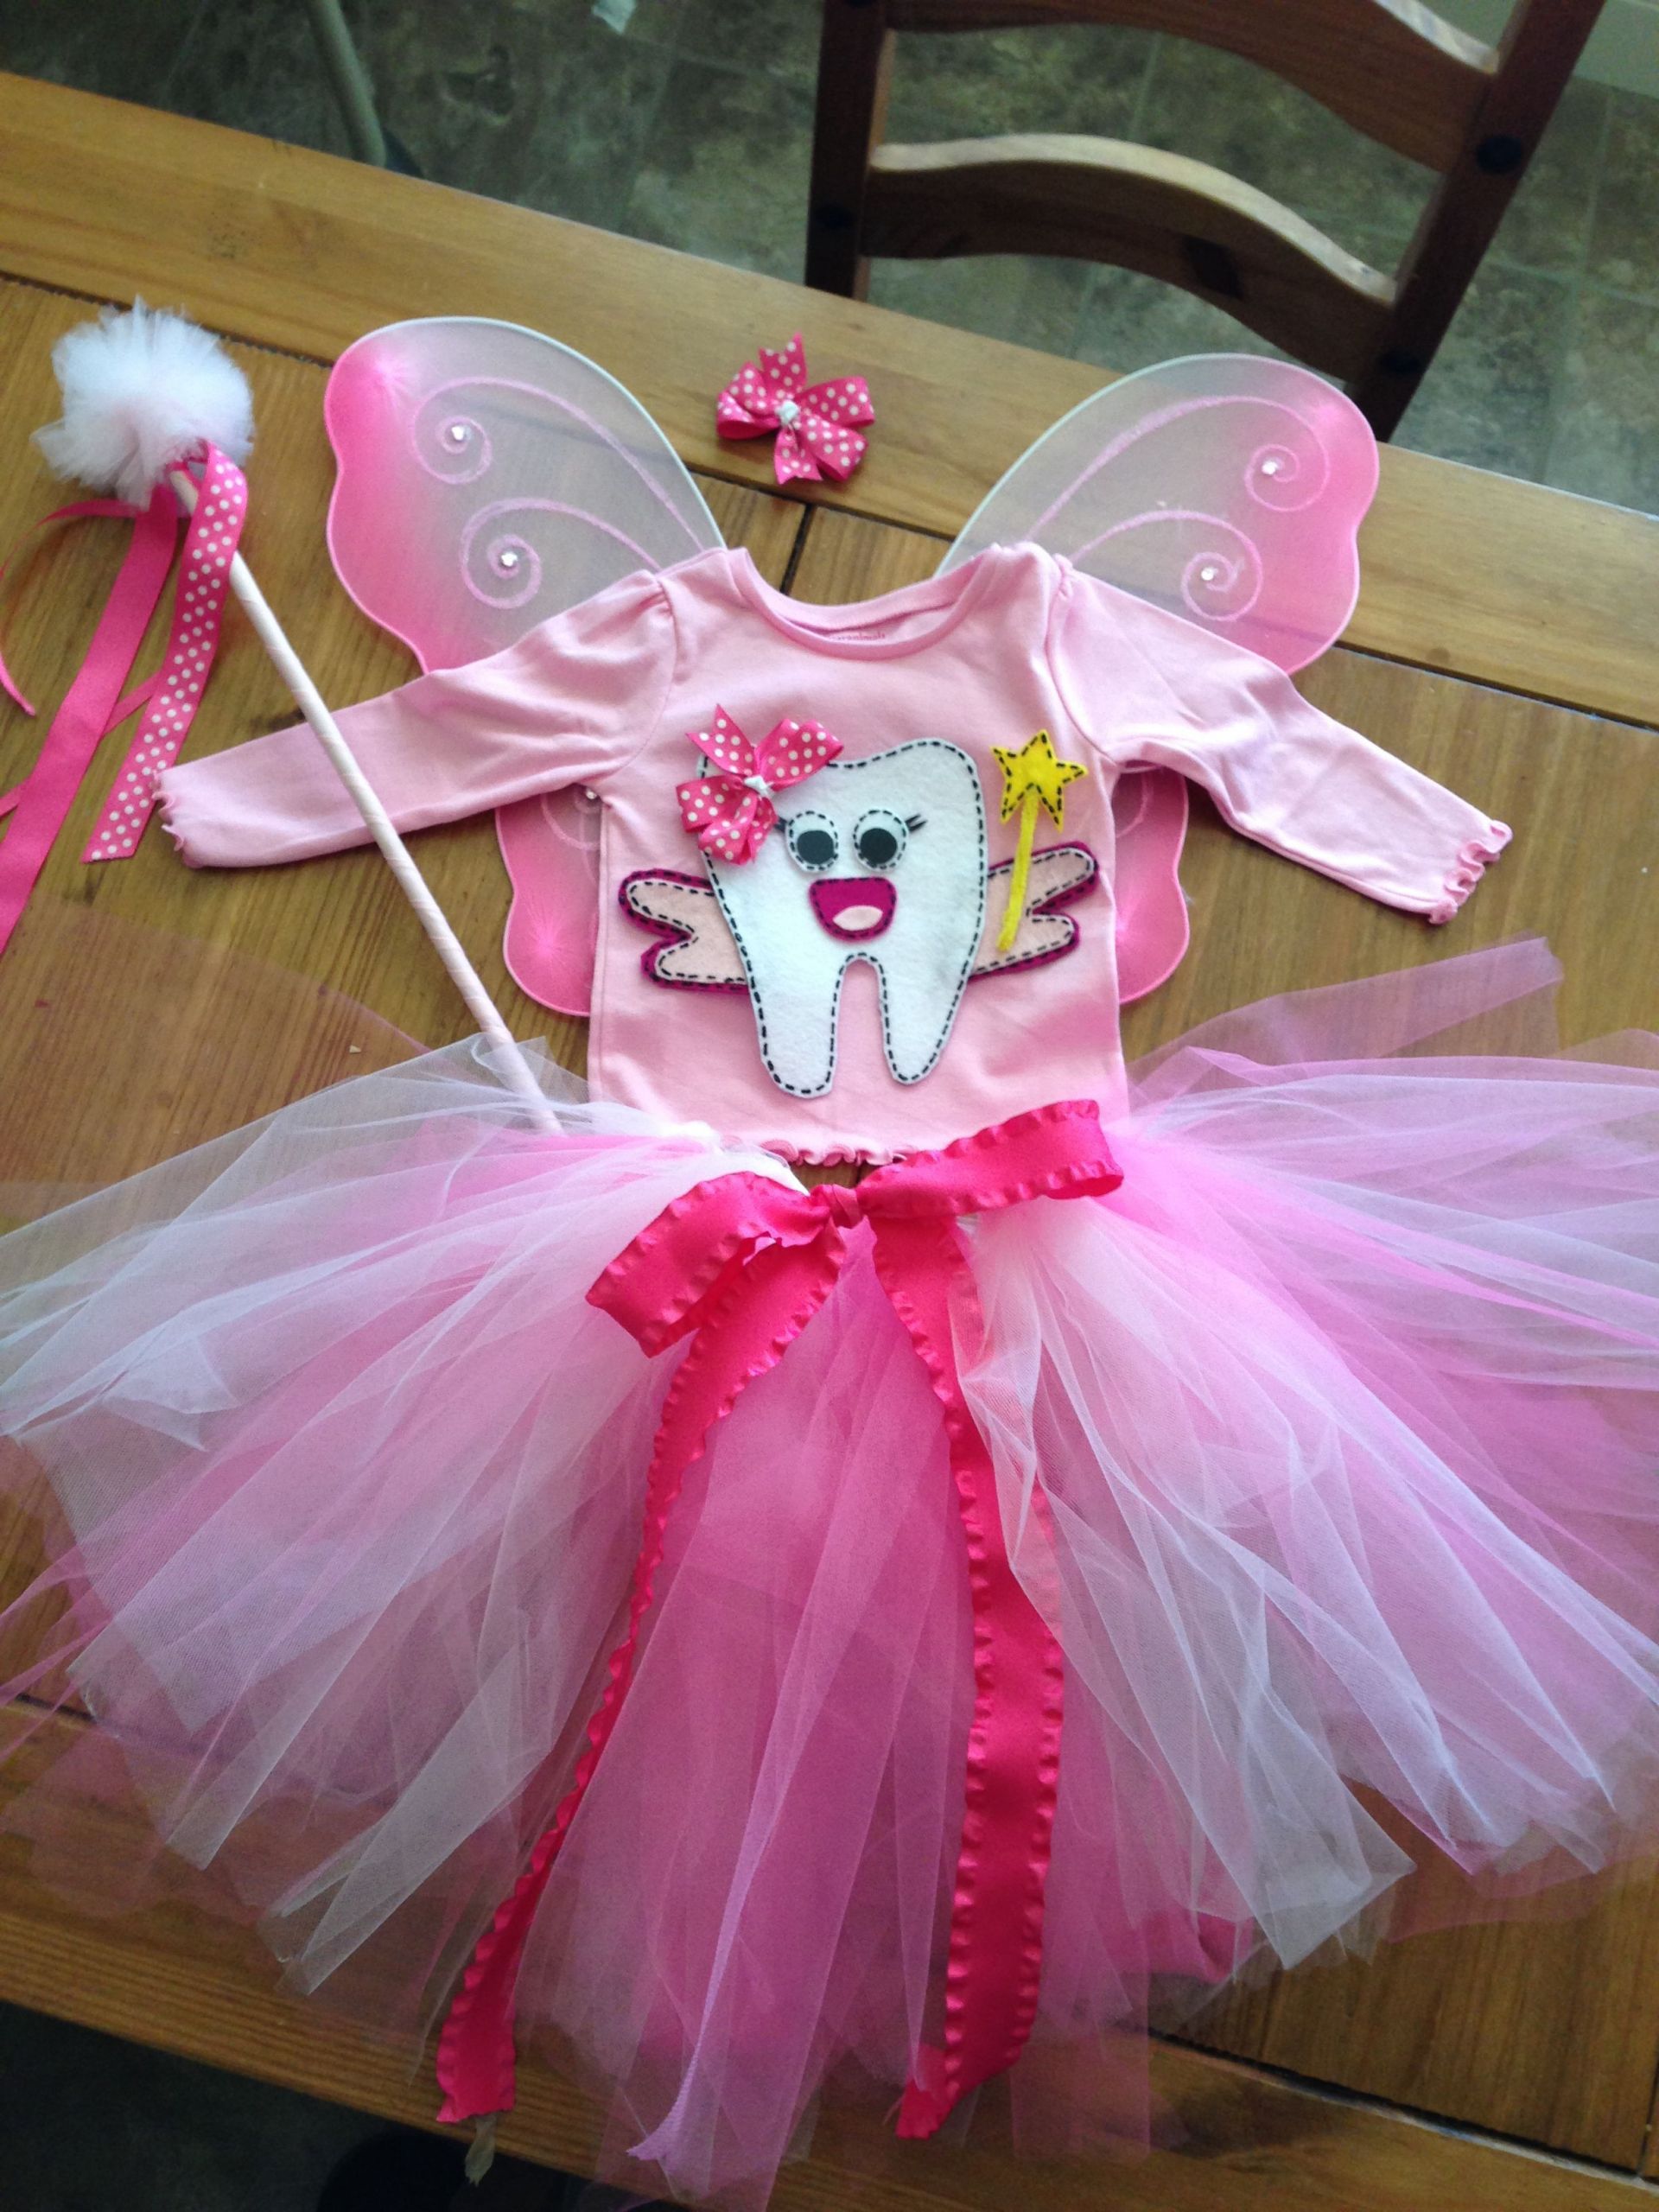 DIY Tooth Fairy Costumes
 Afton s tooth fairy costume